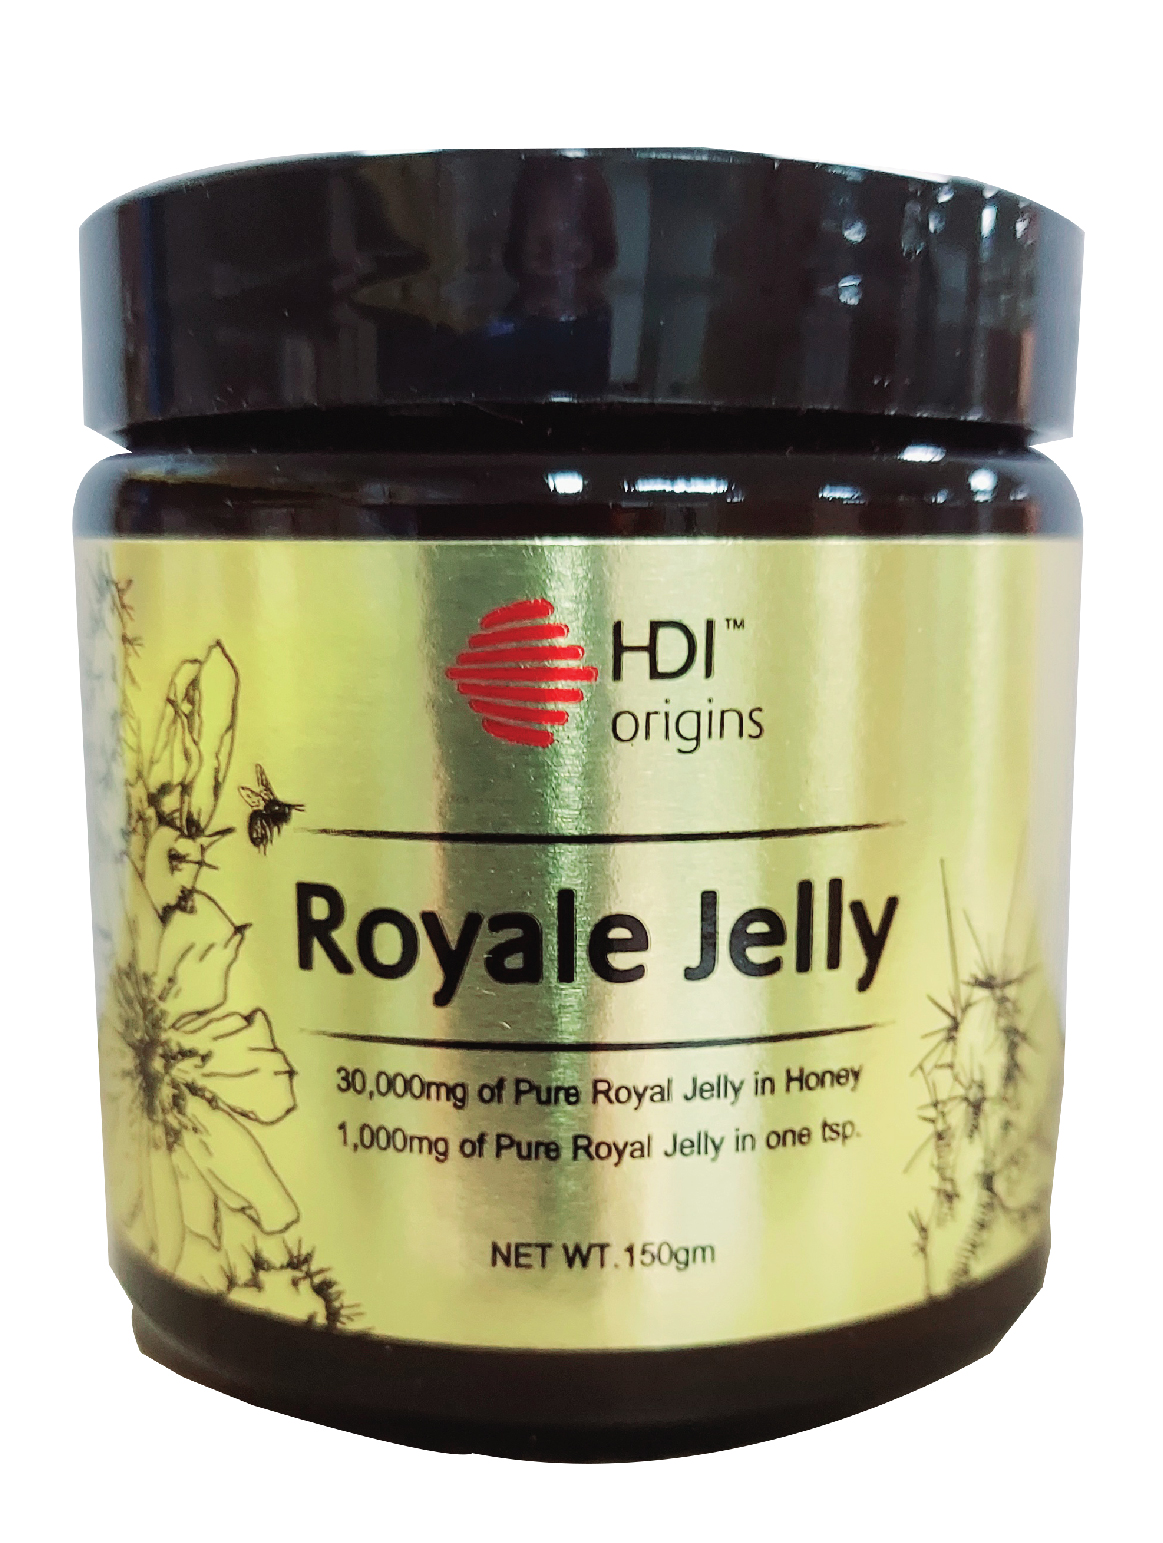 HDI ORIGINS ROYALE JELLY